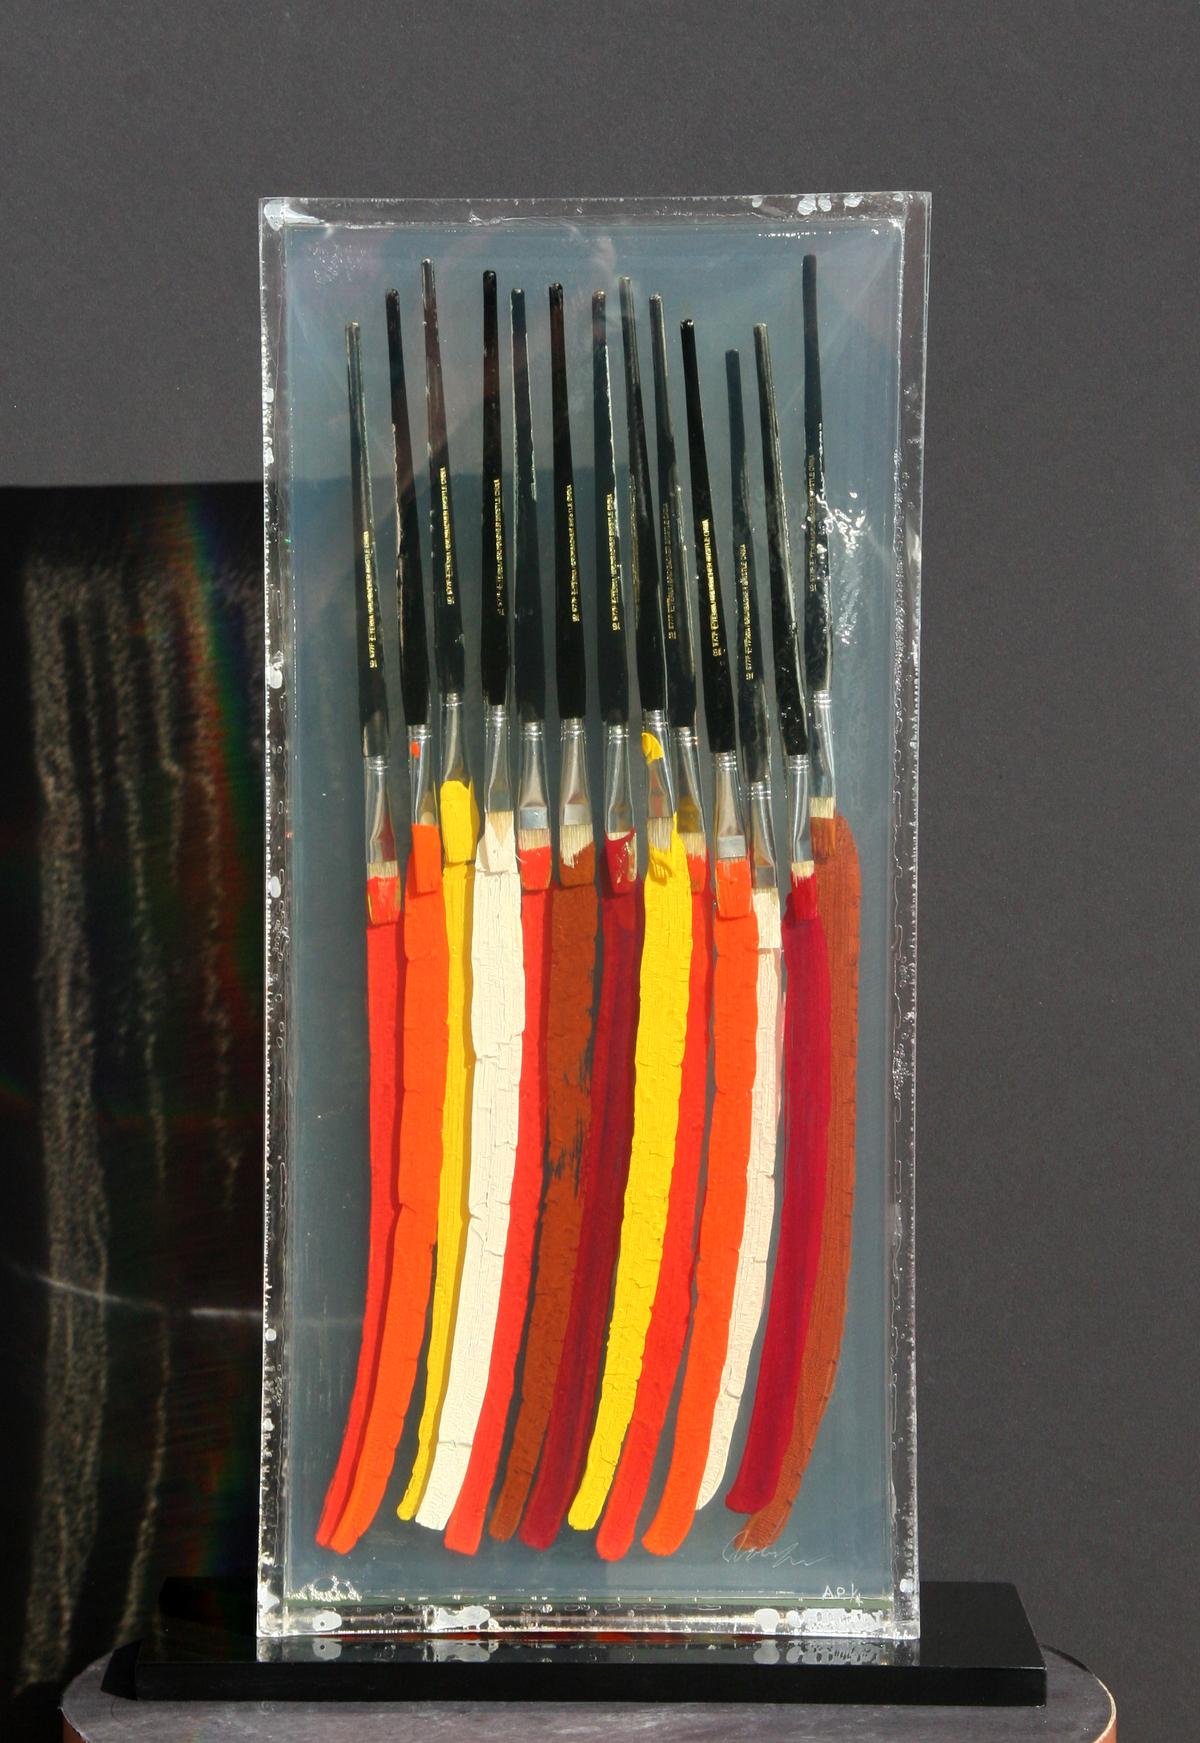 Paintbrushes II, Accumulation Sculpture by Arman